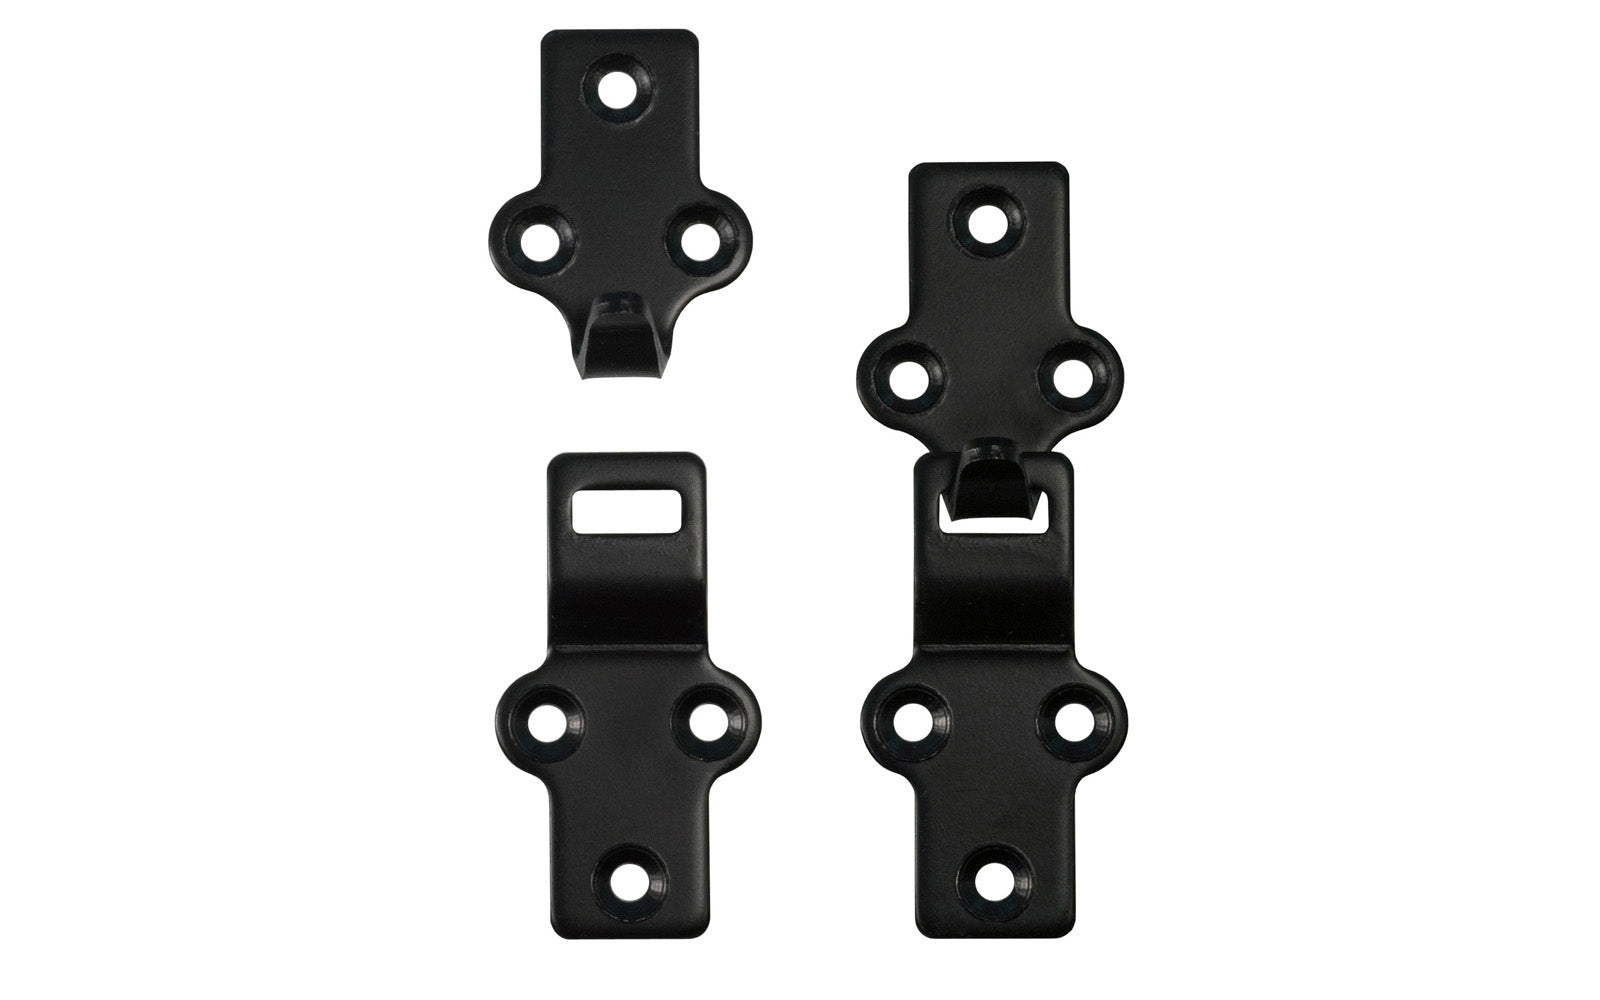 Black Heavy Duty Storm Window & Screen Hangers - Pair~ A pair of traditional & classic black heavy duty hangers for storm windows & screens. This hanger set allows storm sashes & screens to be easily removed. The hangers are made of 1/8" thick steel & have a satin black thick finish. May be used on sashes hung flush with the casing, & or sashes set out of the casing.